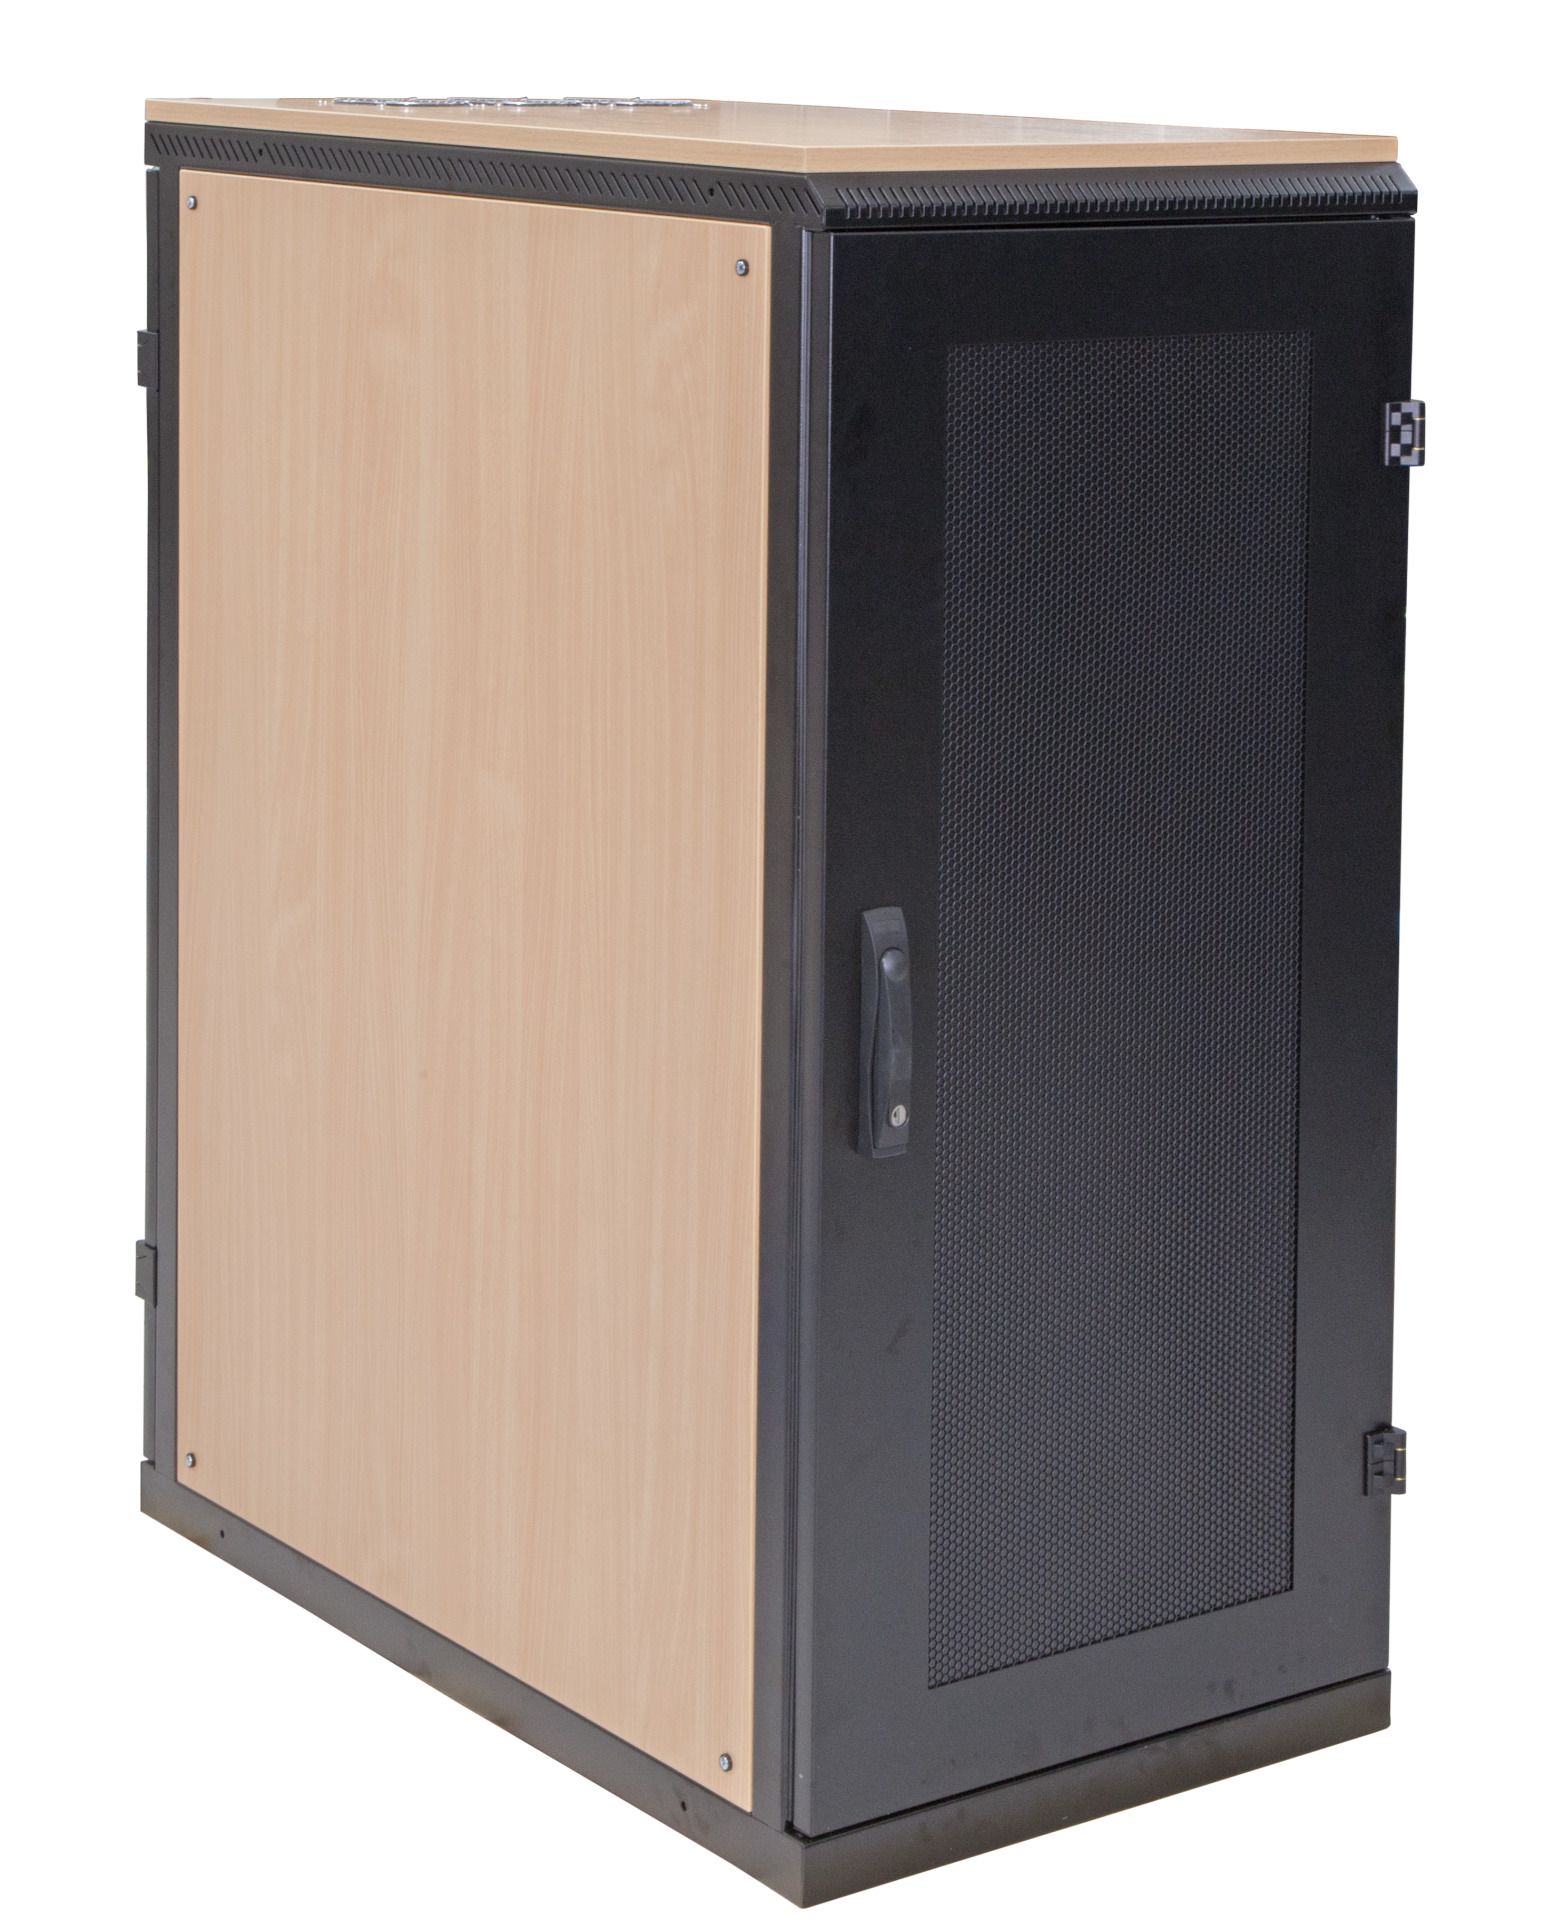 Server Cabinet 26U, 600 x 1000 mm Acoustically Insulated, Wood Design